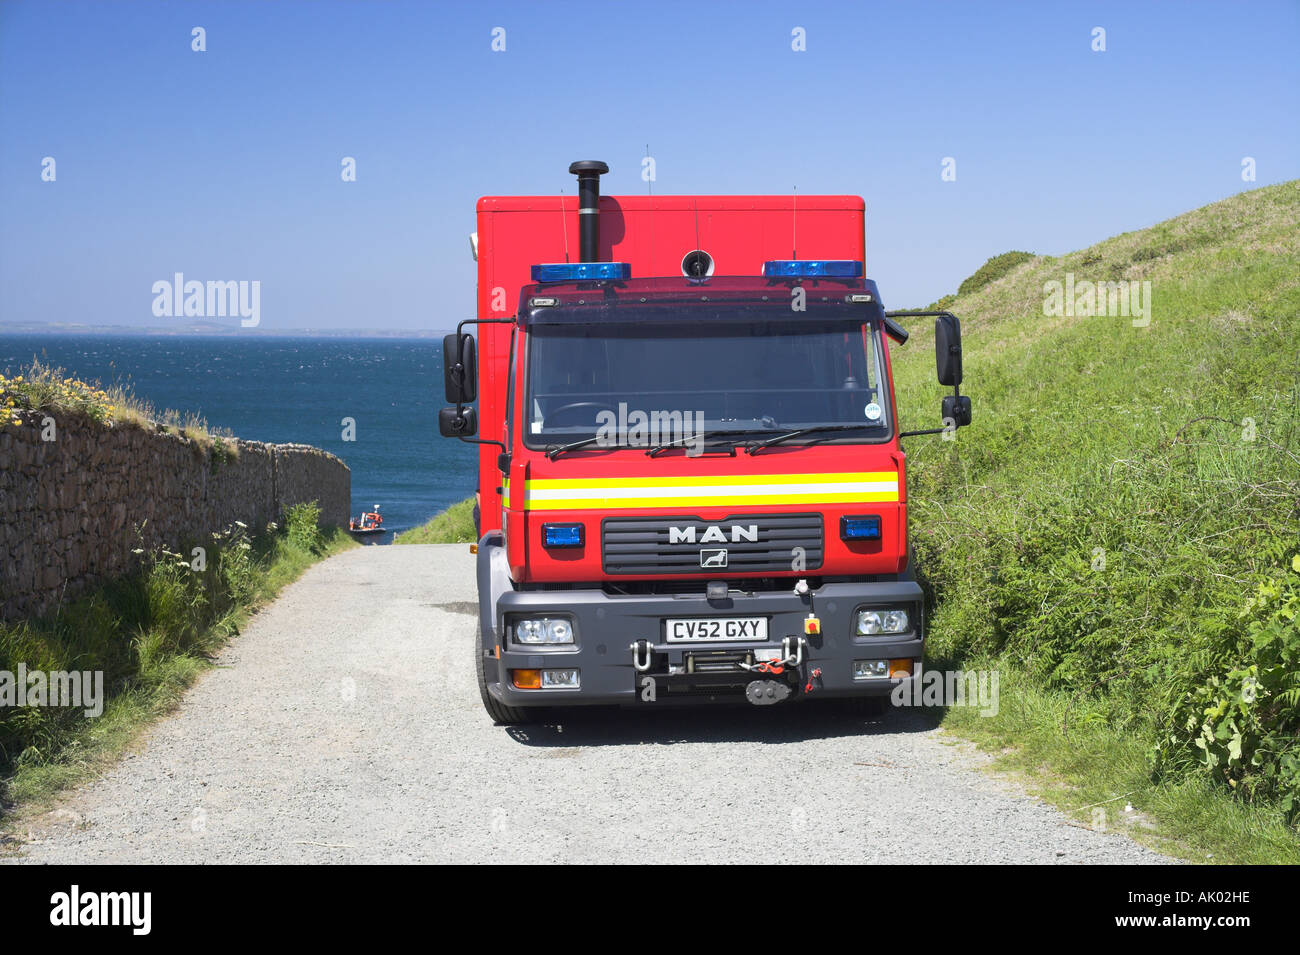 Underwater Search and Rescue Vehicle Stock Photo